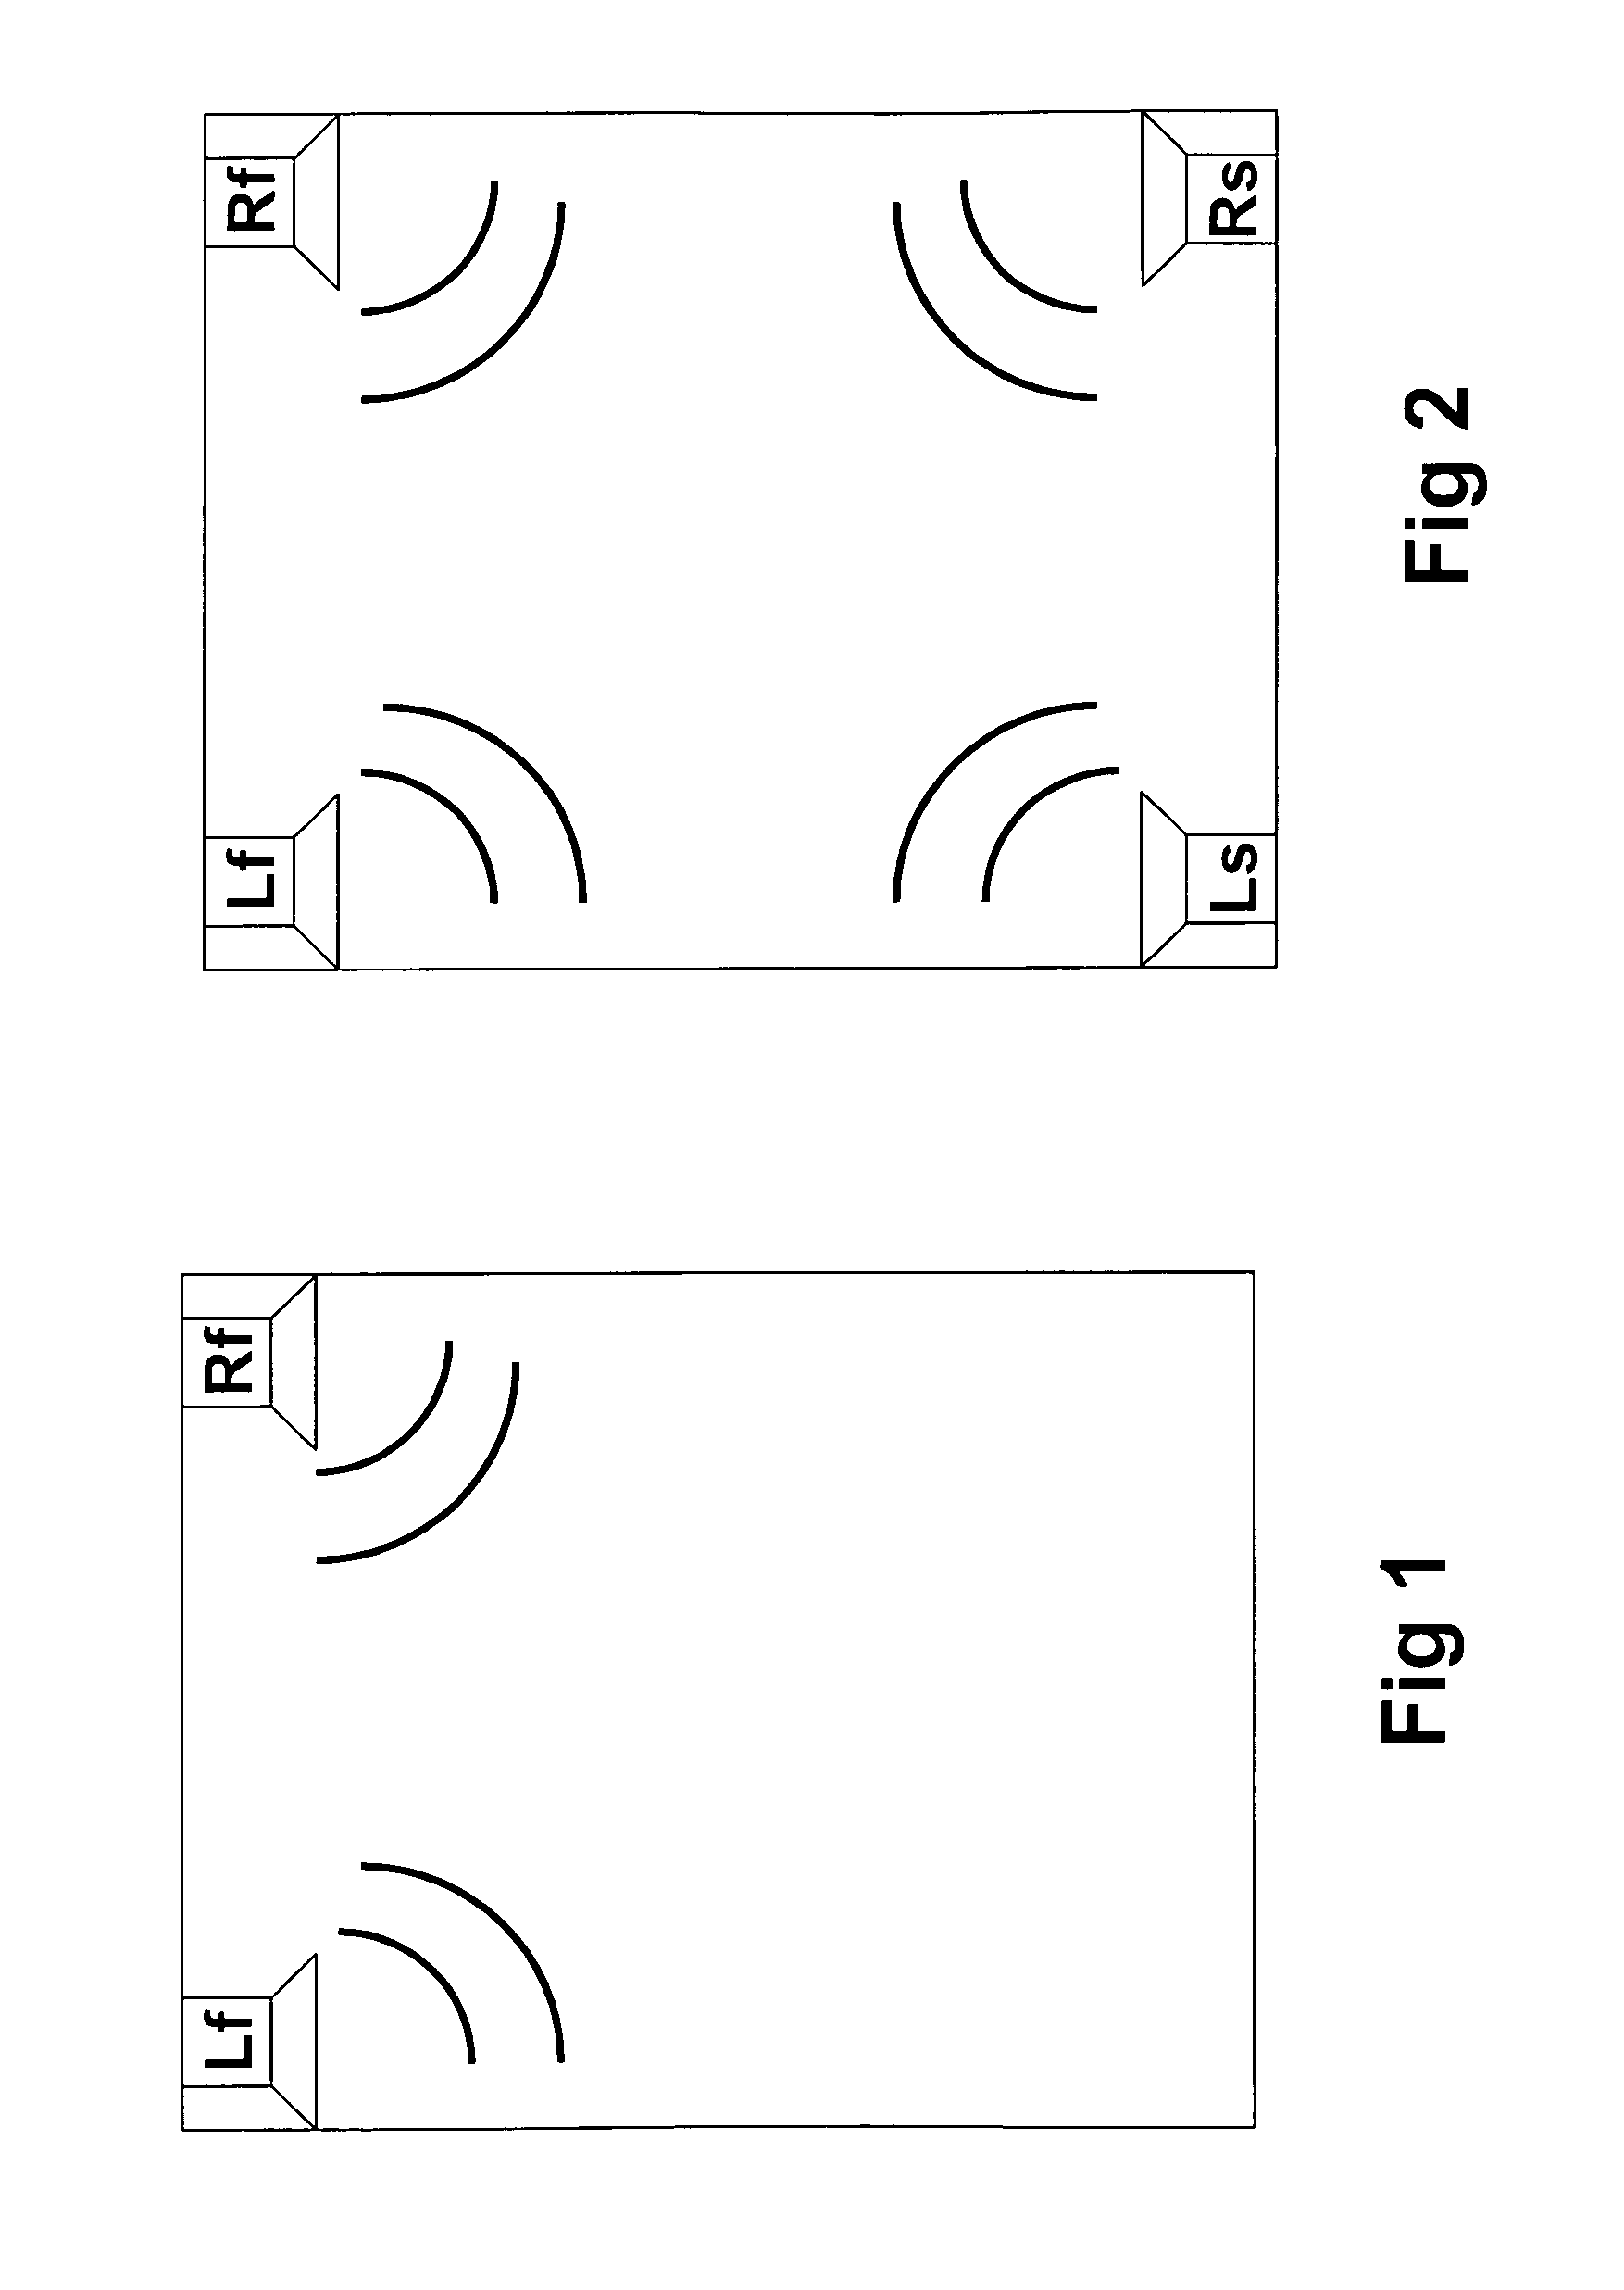 Method for Generating a Surround Audio Signal From a Mono/Stereo Audio Signal